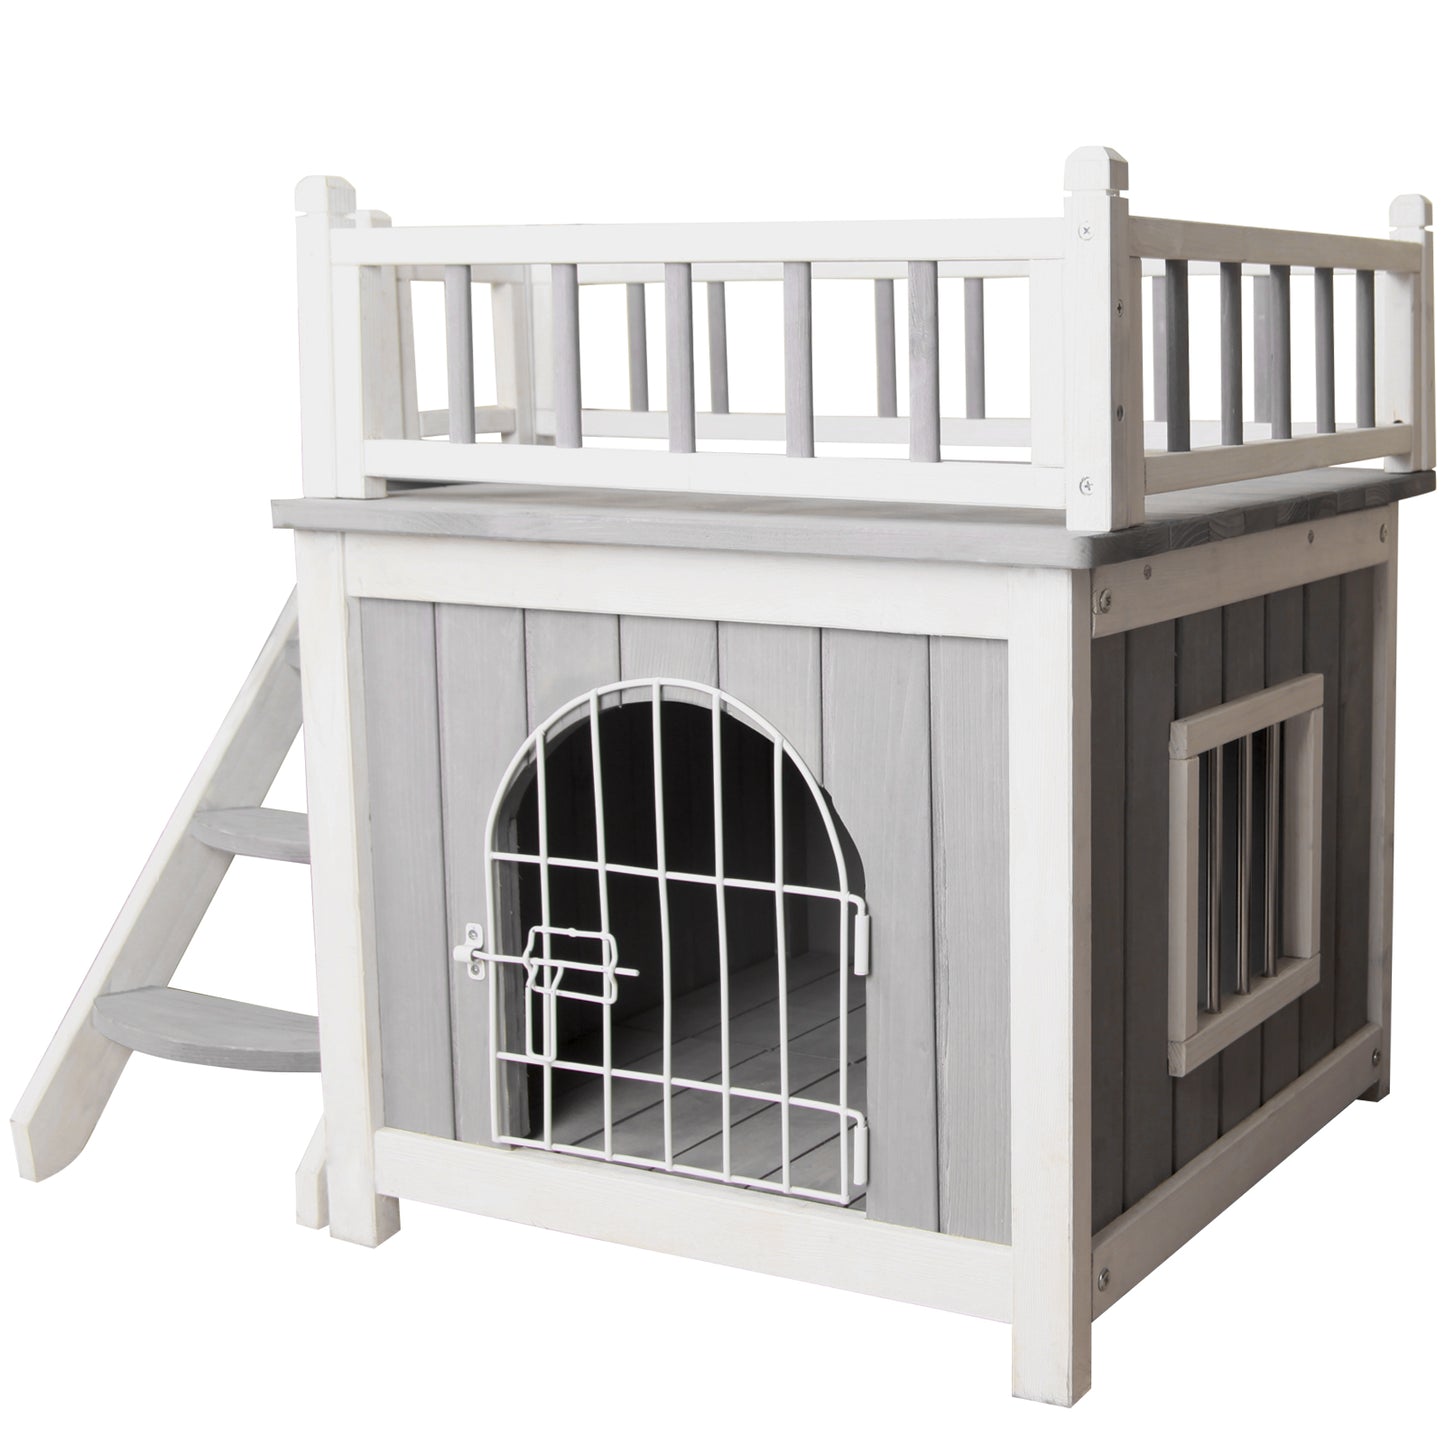 Petsfit-Dog-Houses-Cat-Houses-for-Indoor-with-Side-Window-01